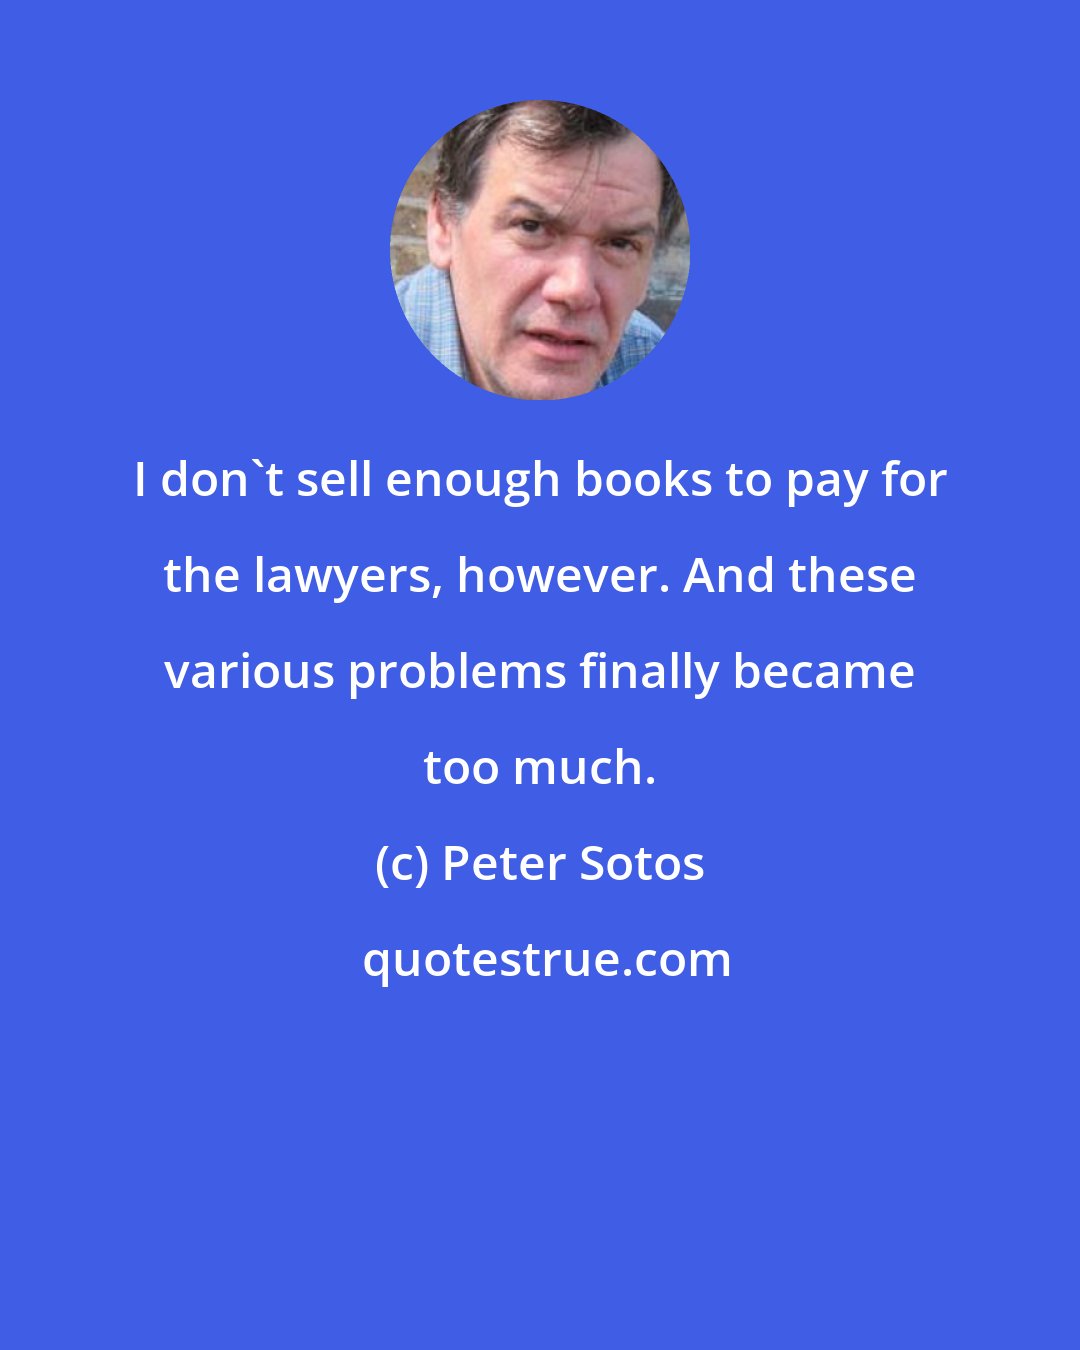 Peter Sotos: I don't sell enough books to pay for the lawyers, however. And these various problems finally became too much.